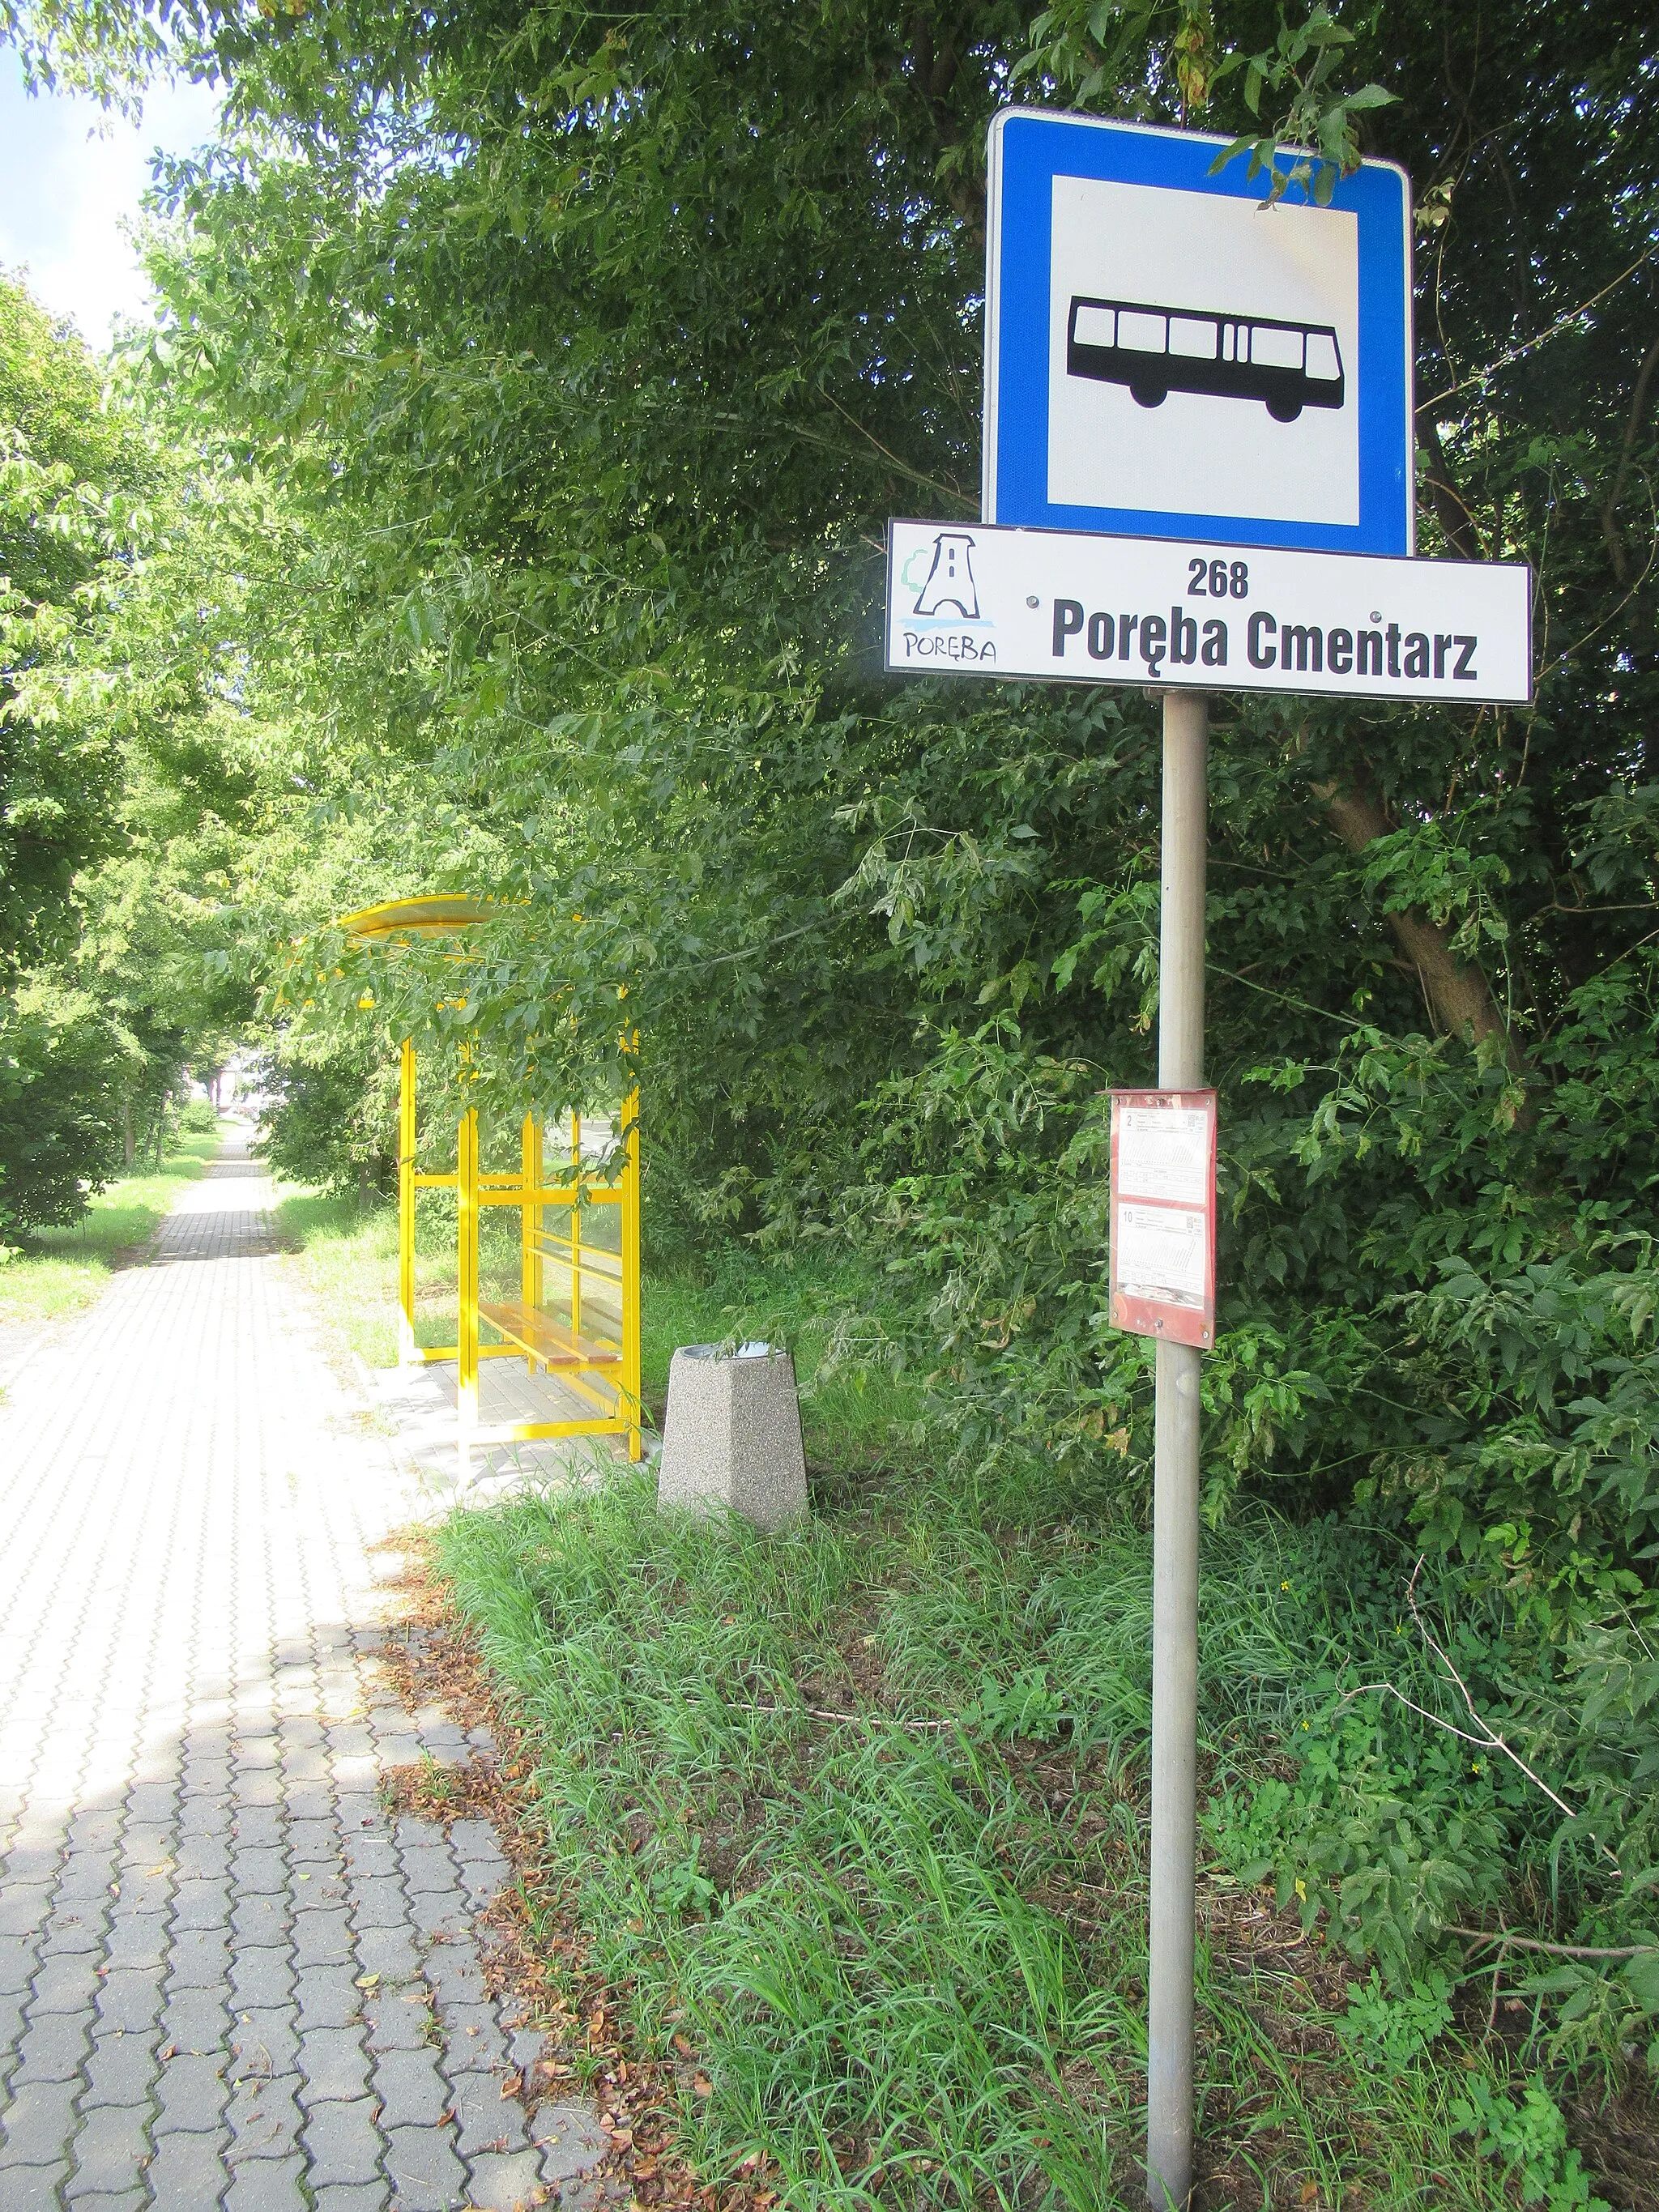 Photo showing: A bus stop in Poręba